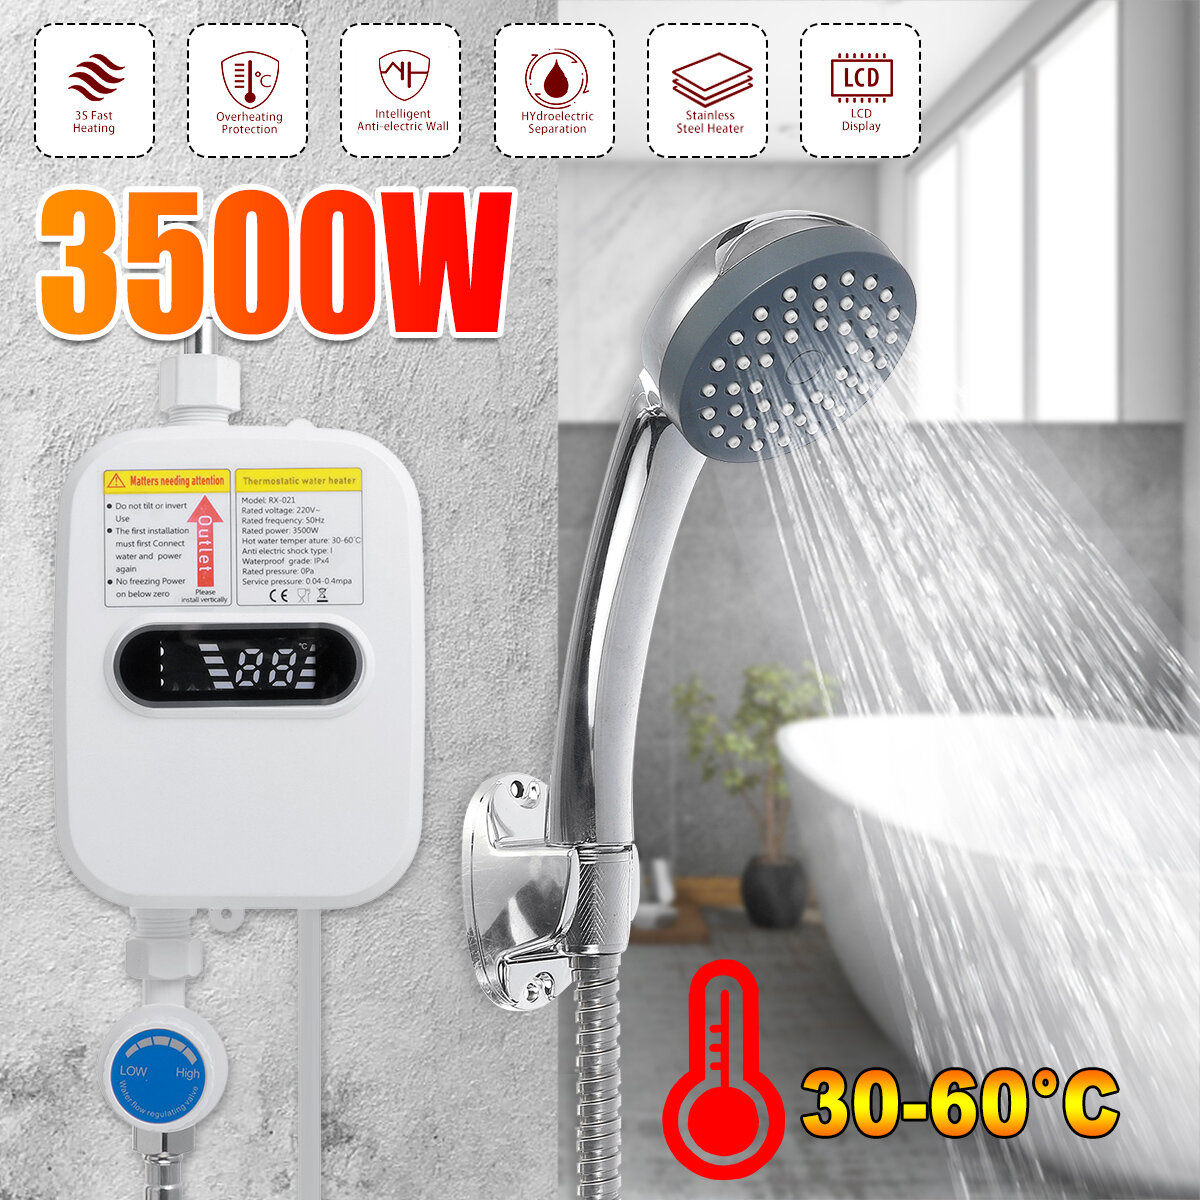 best price,3500w,220v,mini,electric,water,heater,tankless,discount